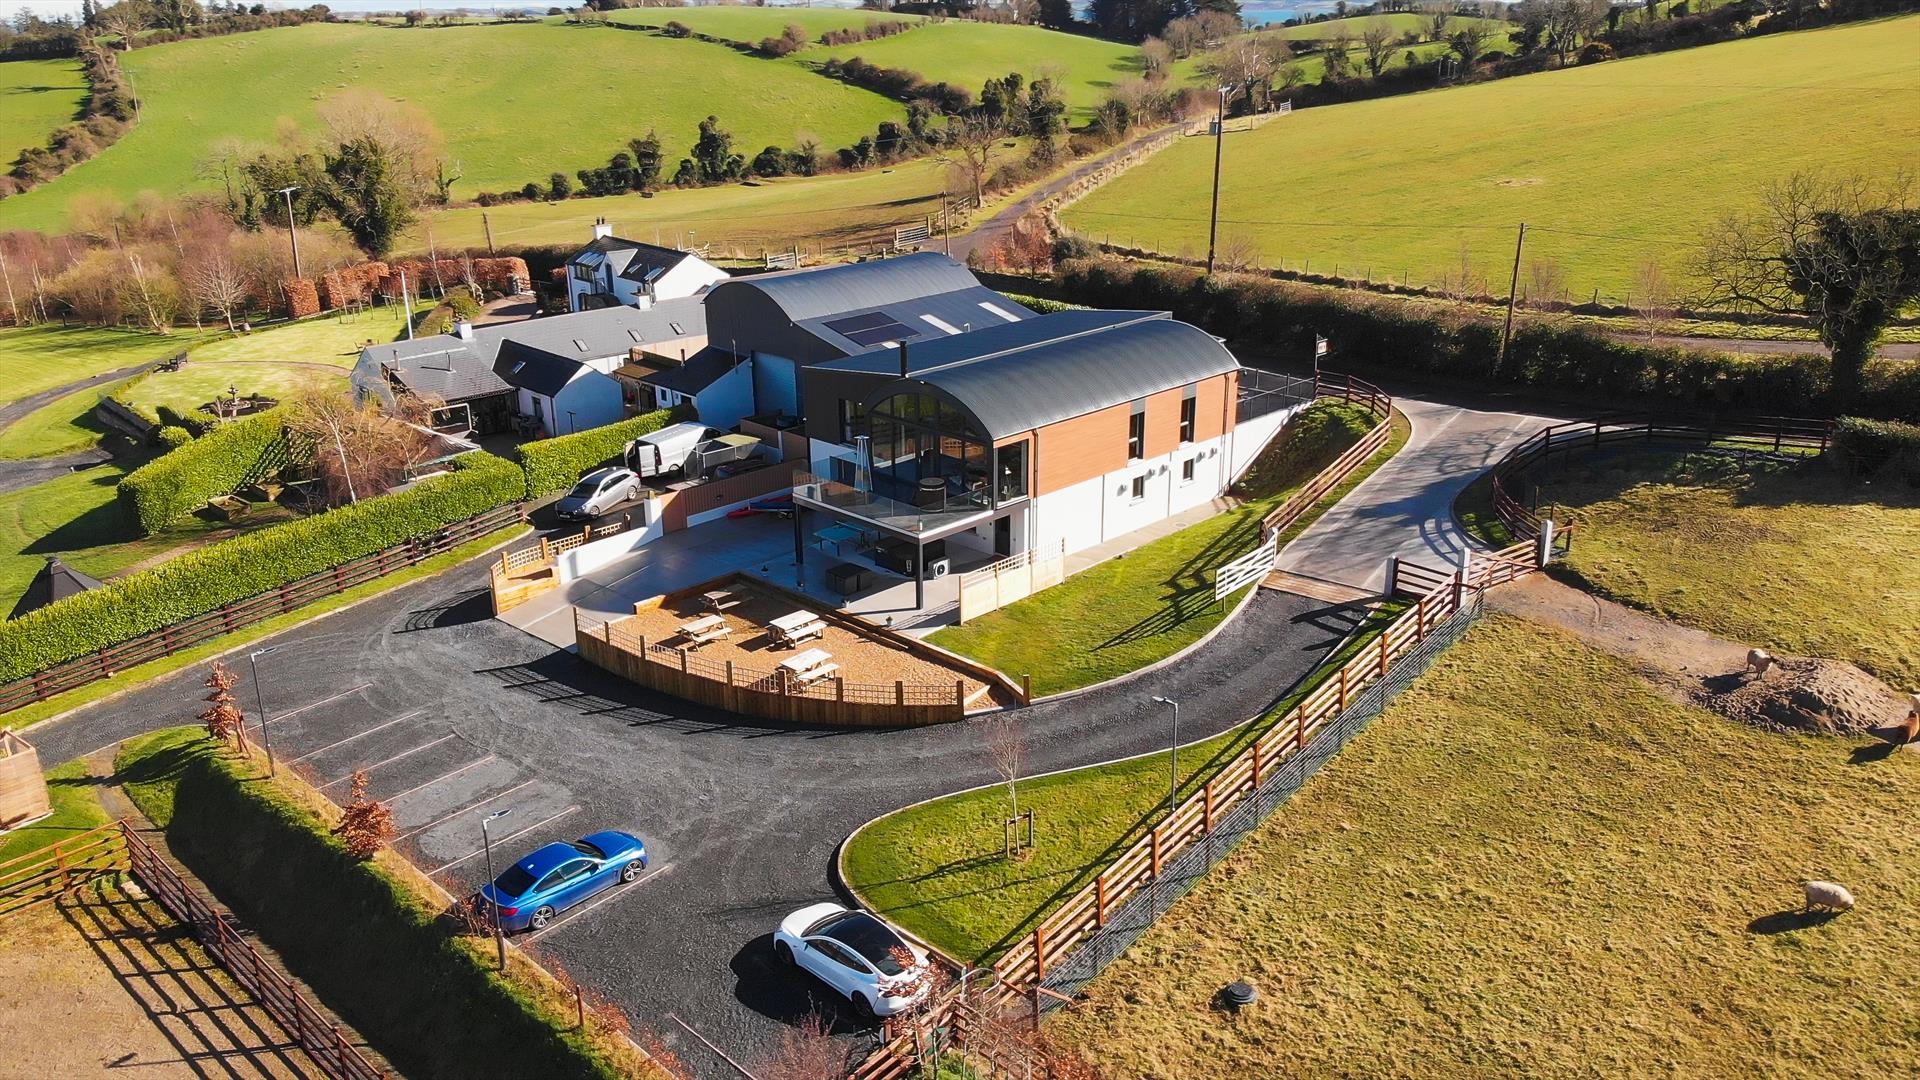 Birdseye view of The Lodge at Quarterland and surrounding area